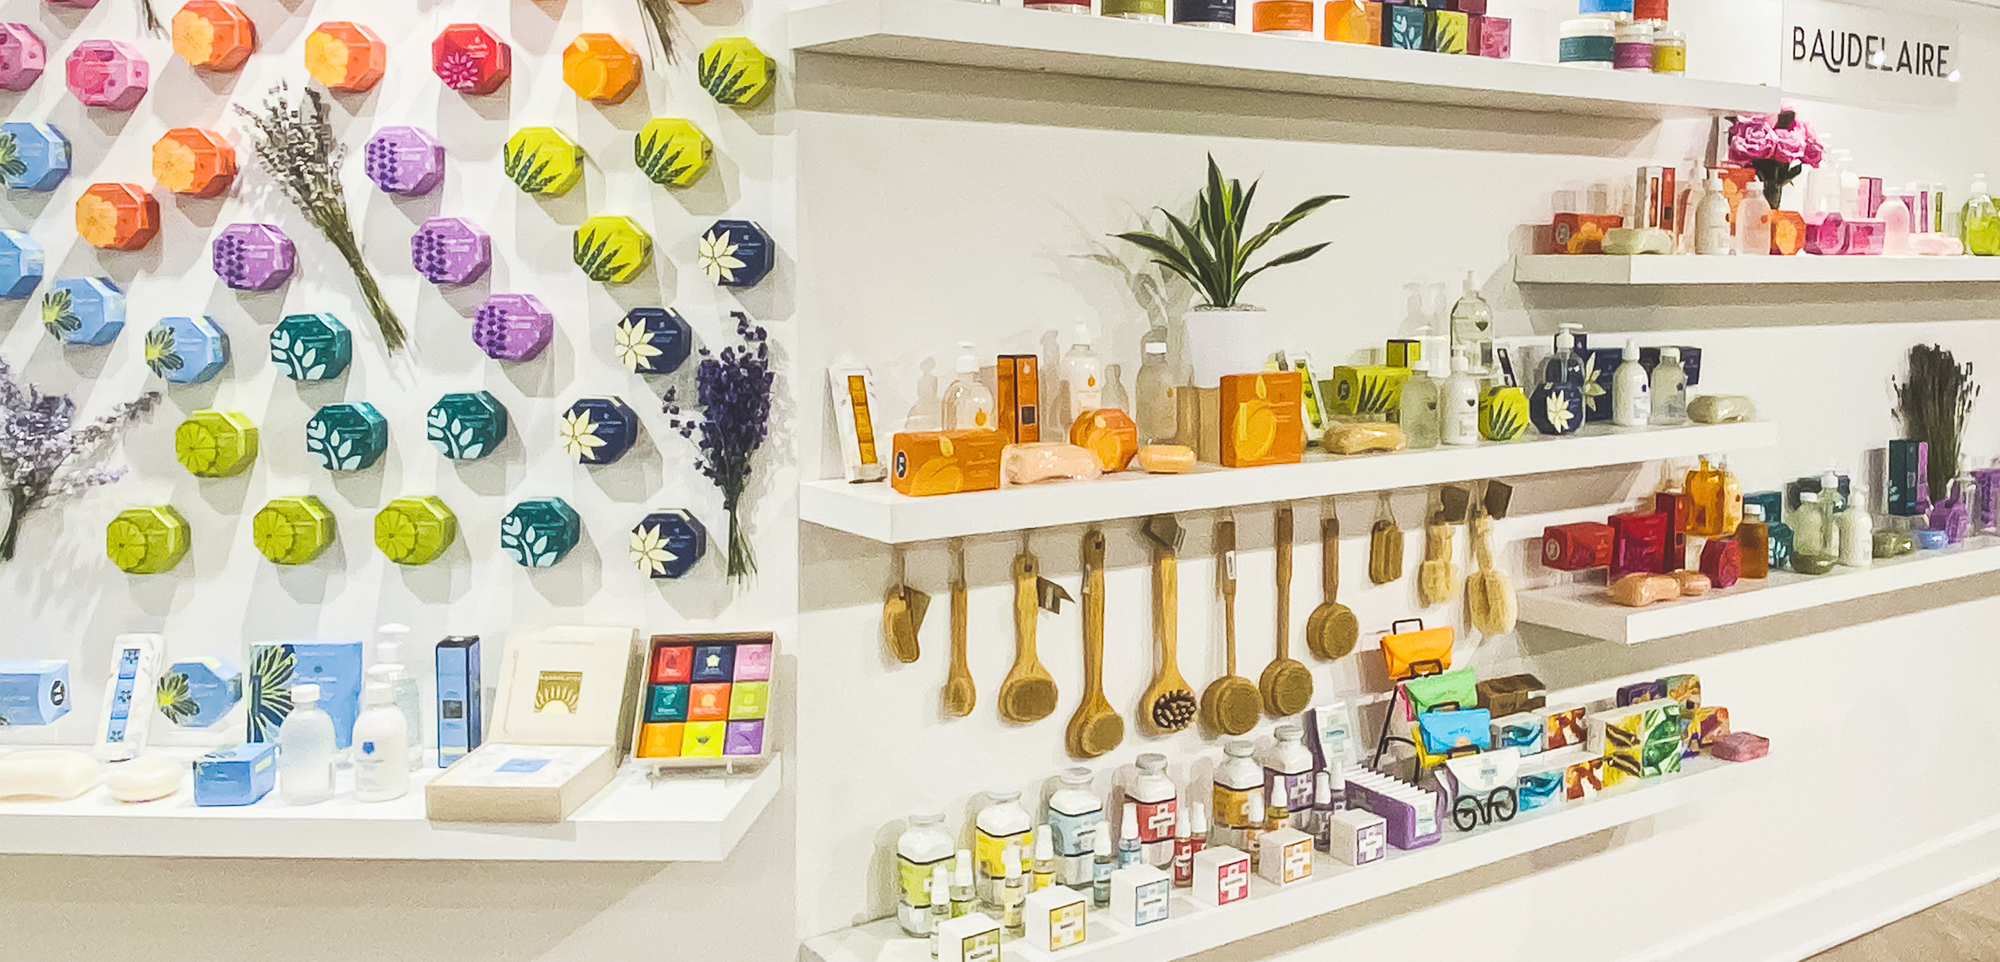 A collection of Baudelaire products displaying various artisanal collections